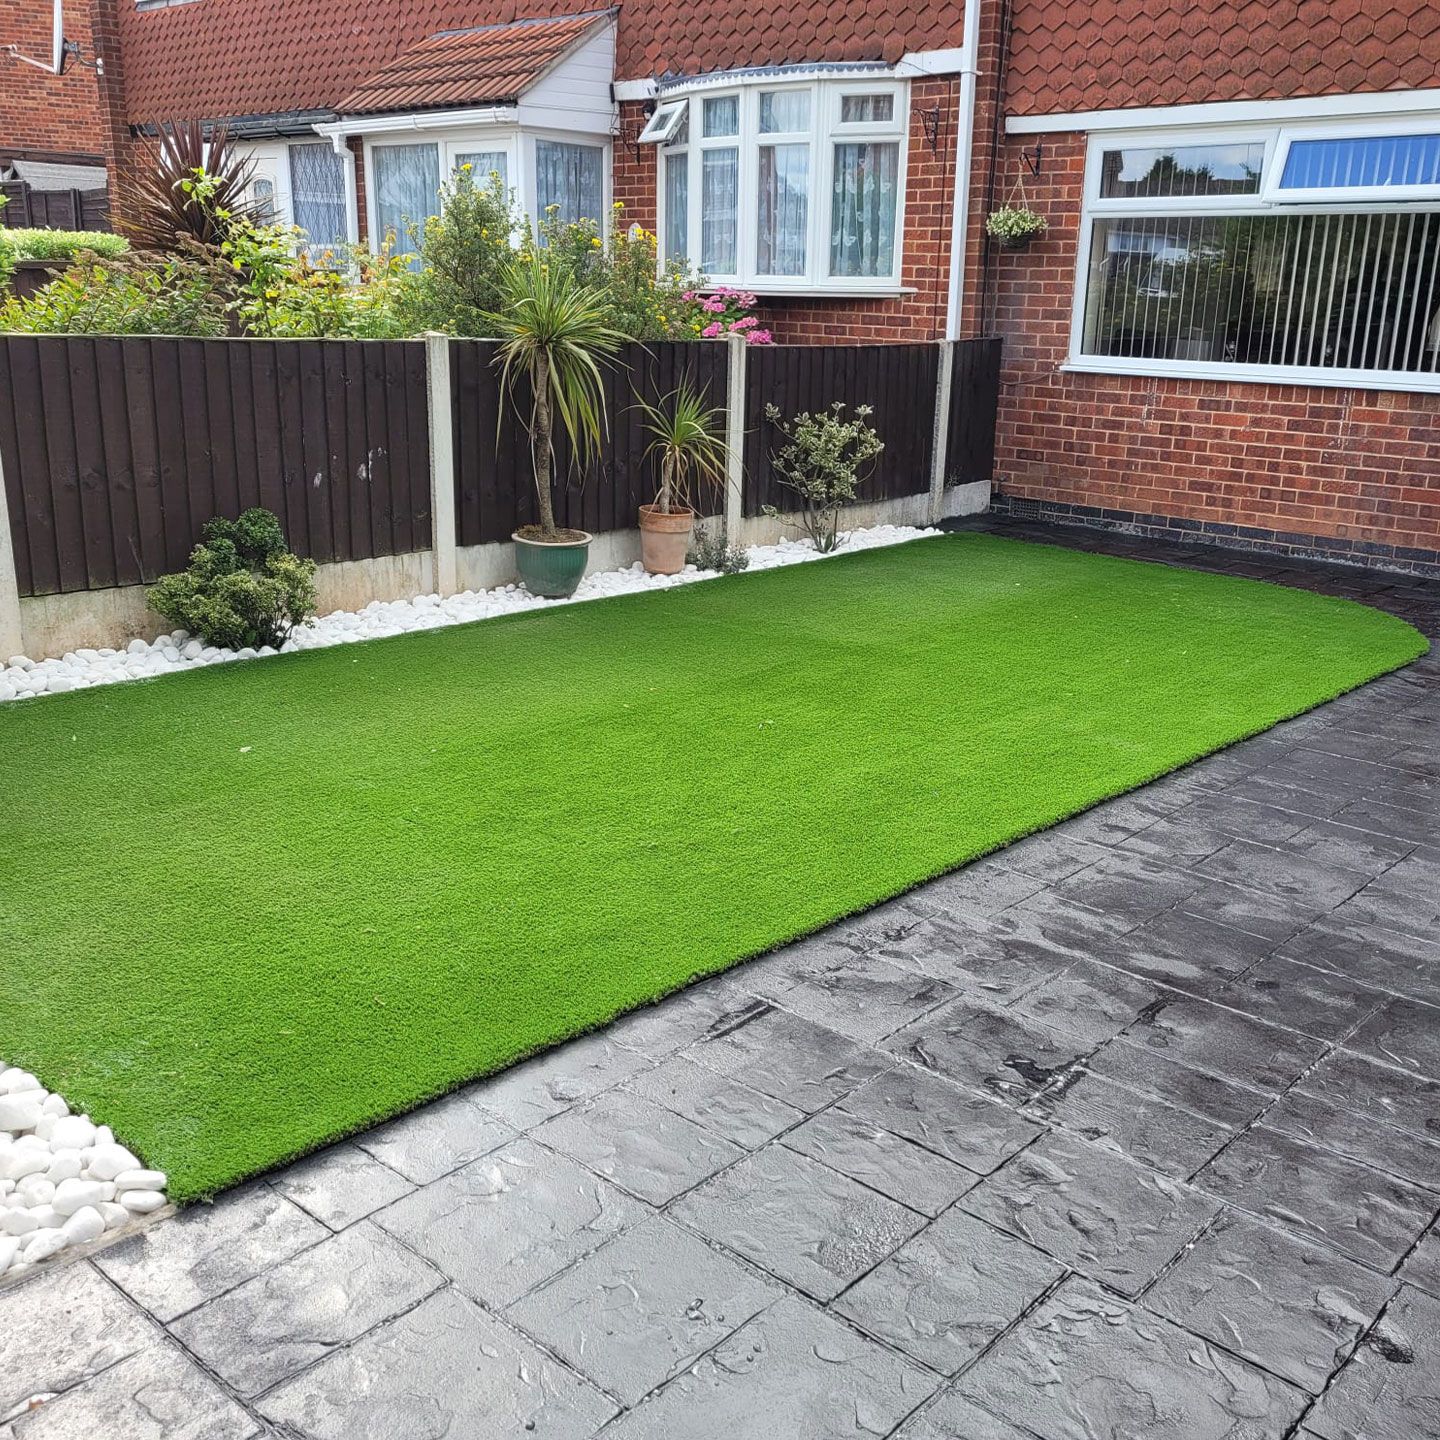 landscaping in Balsall Common showing new artificial grass and patterned concrete paving